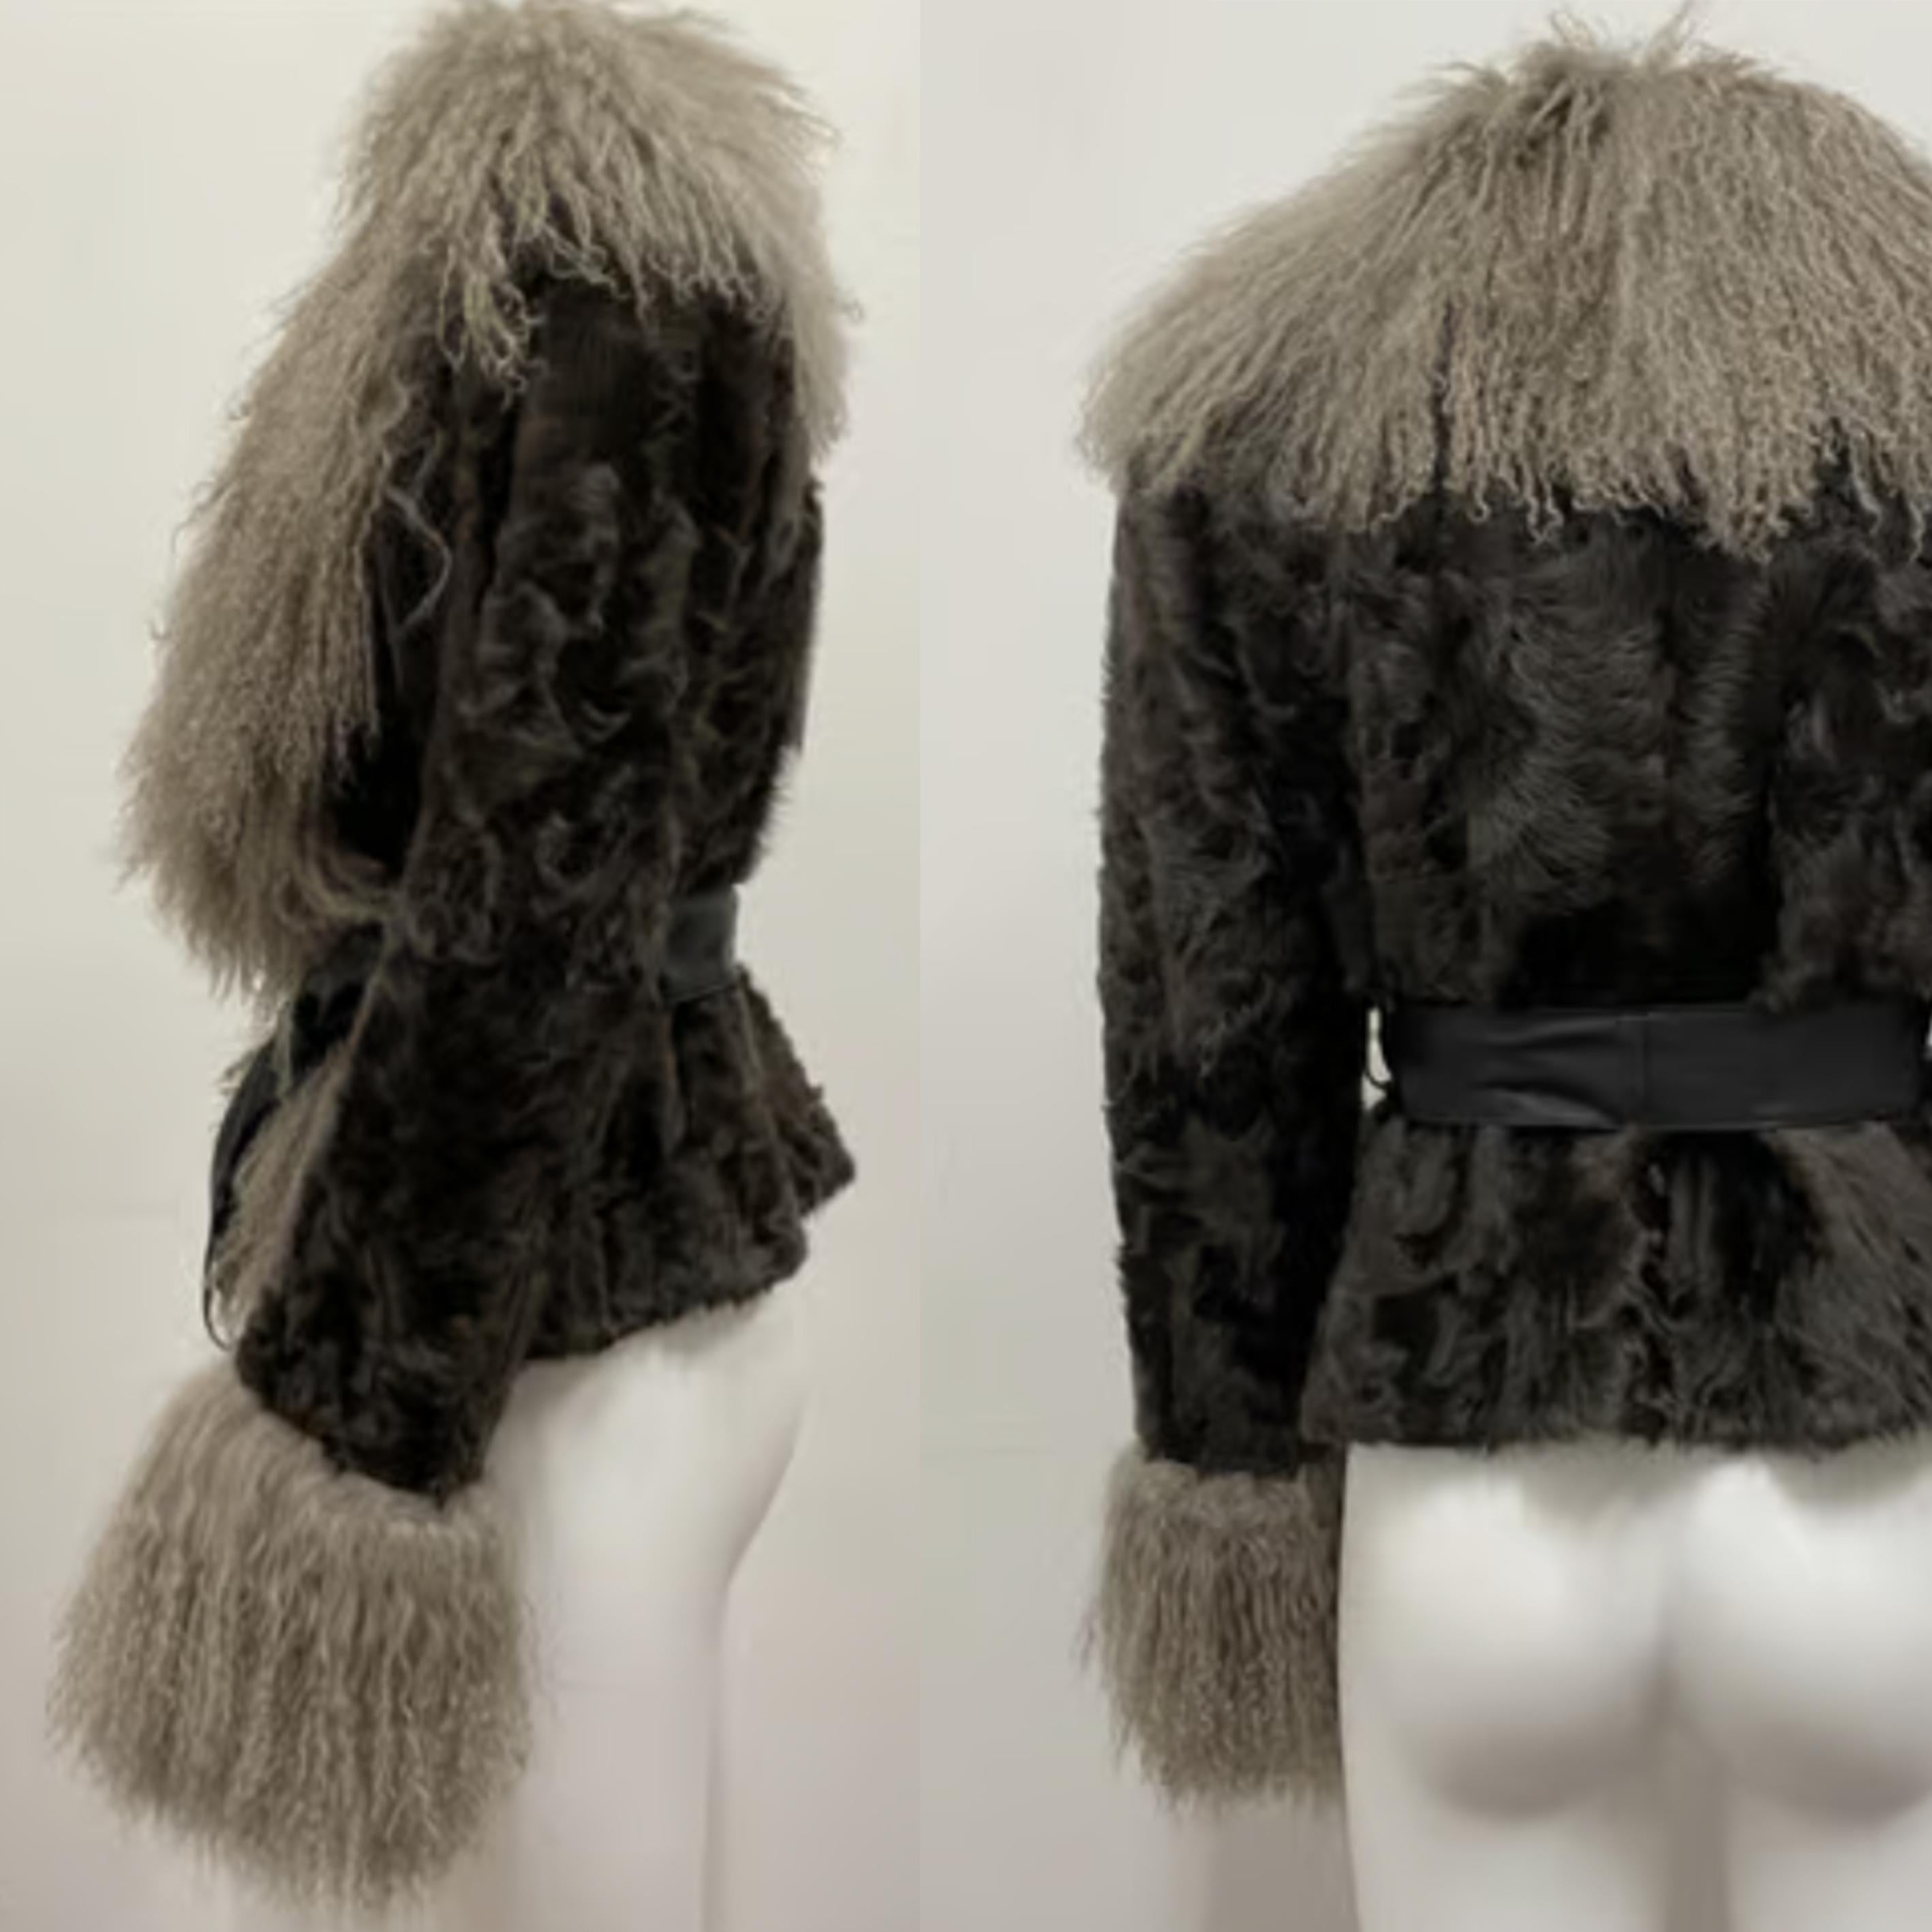 Tag D&G

Size 38IT/ European size S

Shoulder 47cm

Chest 40cm 

Length 50cm 

Sleeve 50cm 

50% lamb/ 40% tibet lambskin/ 10% lambskin 

Lining 97% polyester 

Fur applic - 100% tibet lambskin 

 

Perfect condition 

 

Shipping worldwide with